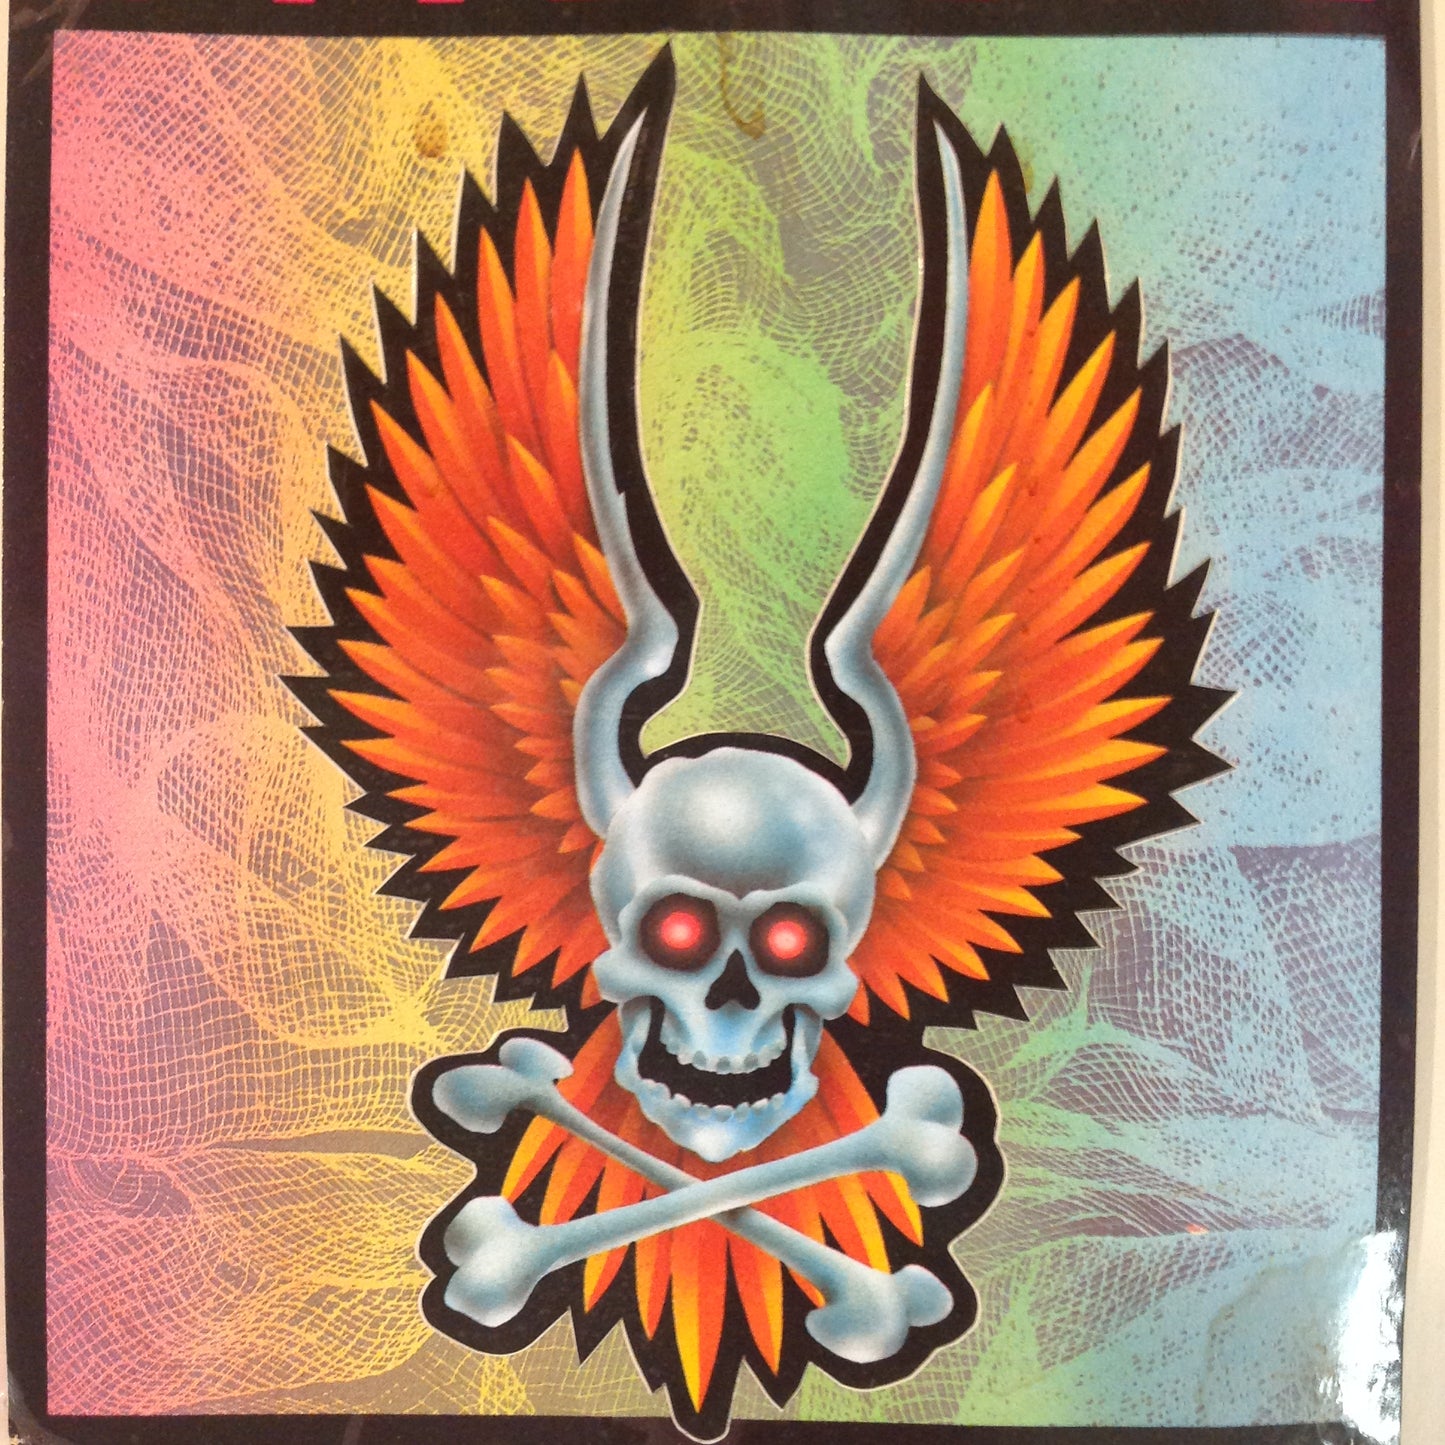 Vintage 1990's NOS Classi-Cal Vinyl Adhesive Sticker Winged Skull and Crossbones